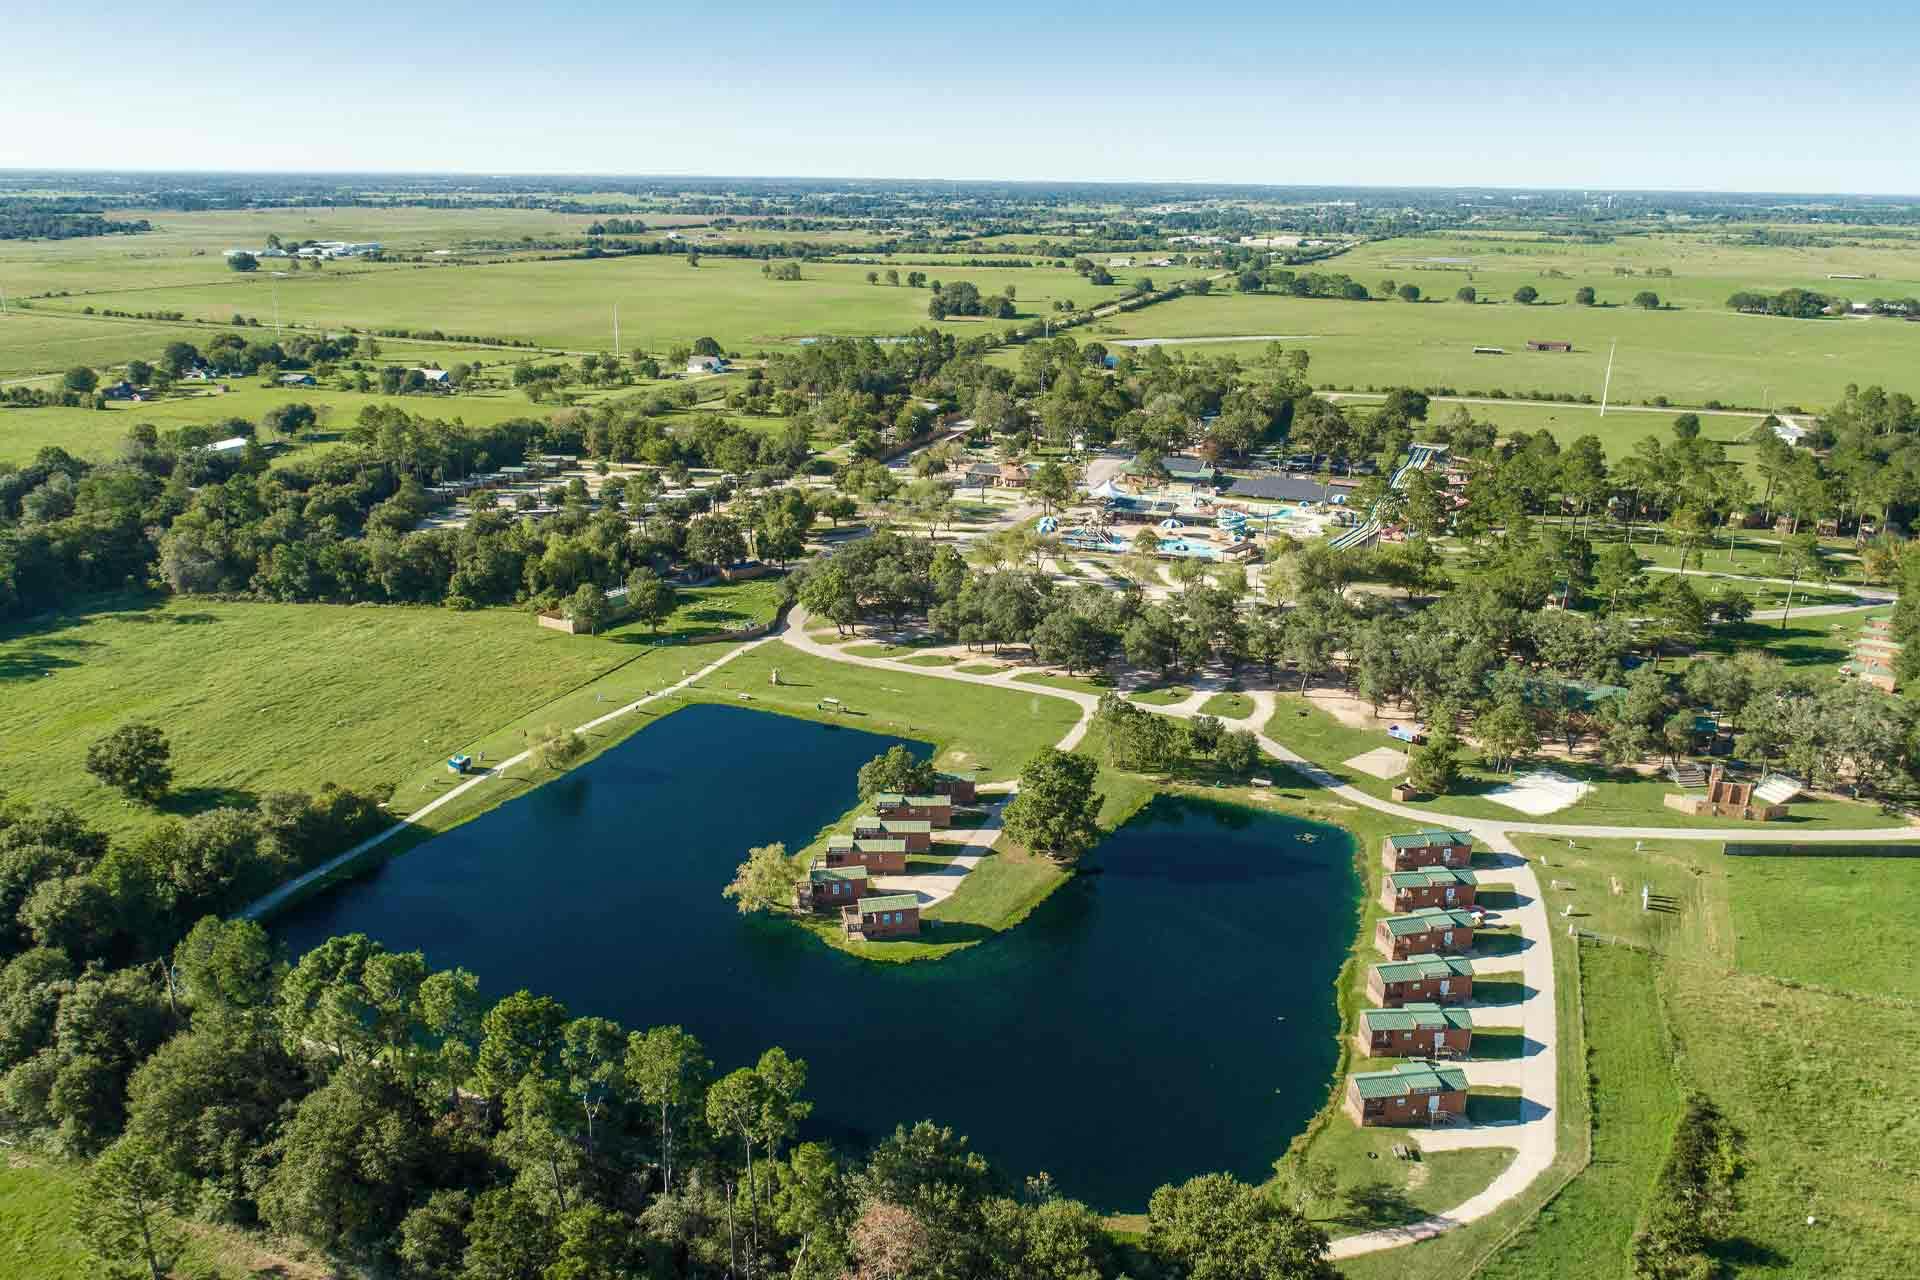 The Best Camping Near Houston, Texas